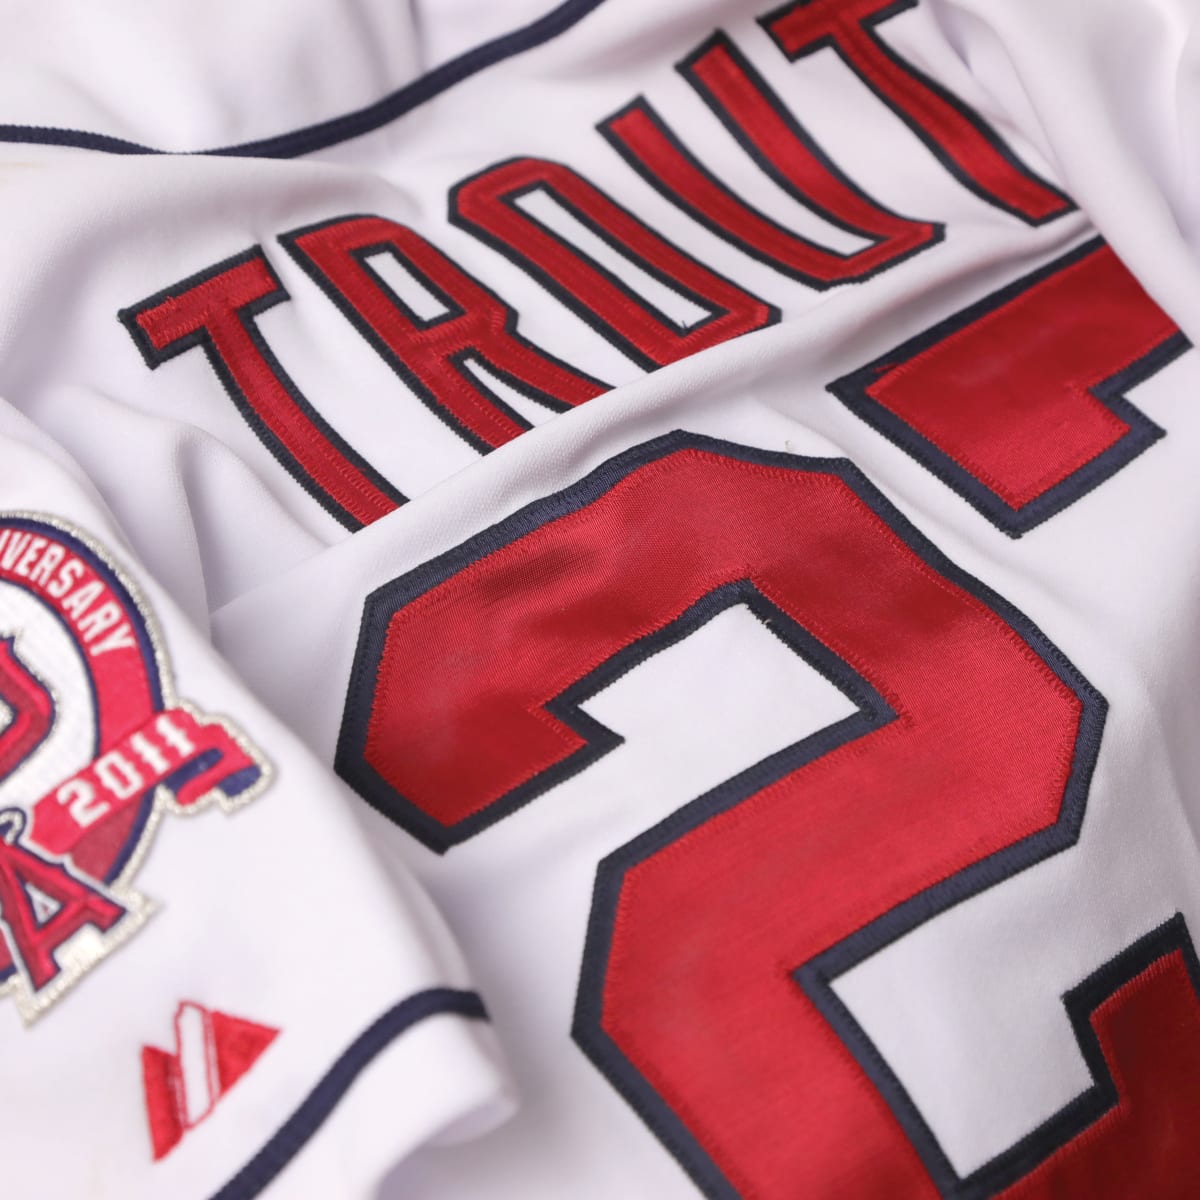 Mike Trout Autographed & Inscribed Jersey - Memorabilia Center